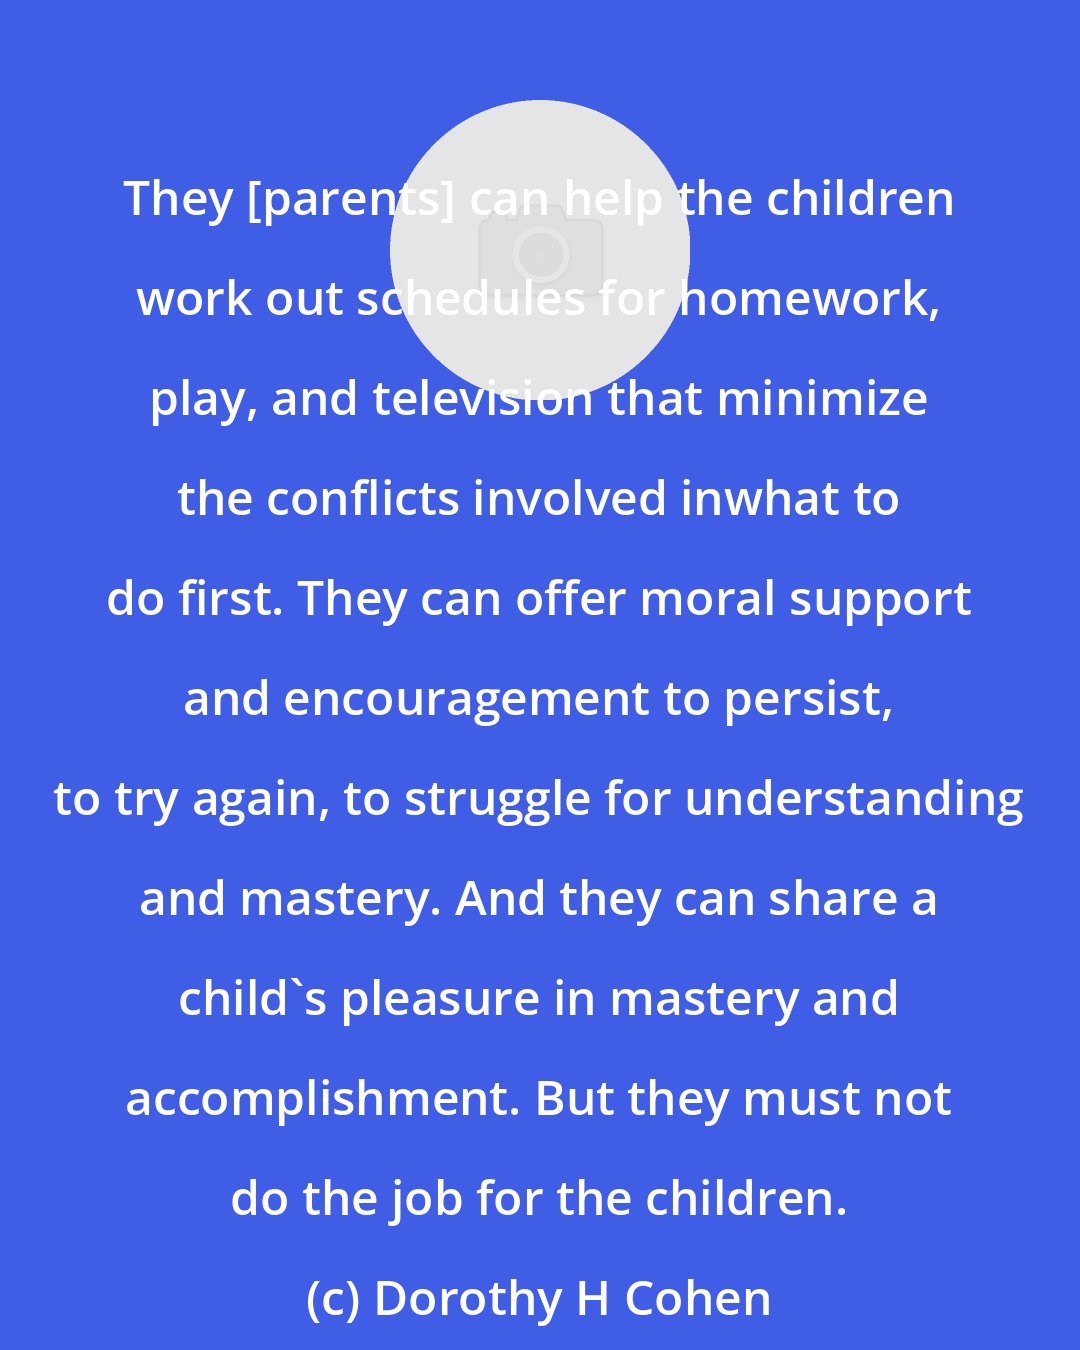 Dorothy H Cohen: They [parents] can help the children work out schedules for homework, play, and television that minimize the conflicts involved inwhat to do first. They can offer moral support and encouragement to persist, to try again, to struggle for understanding and mastery. And they can share a child's pleasure in mastery and accomplishment. But they must not do the job for the children.